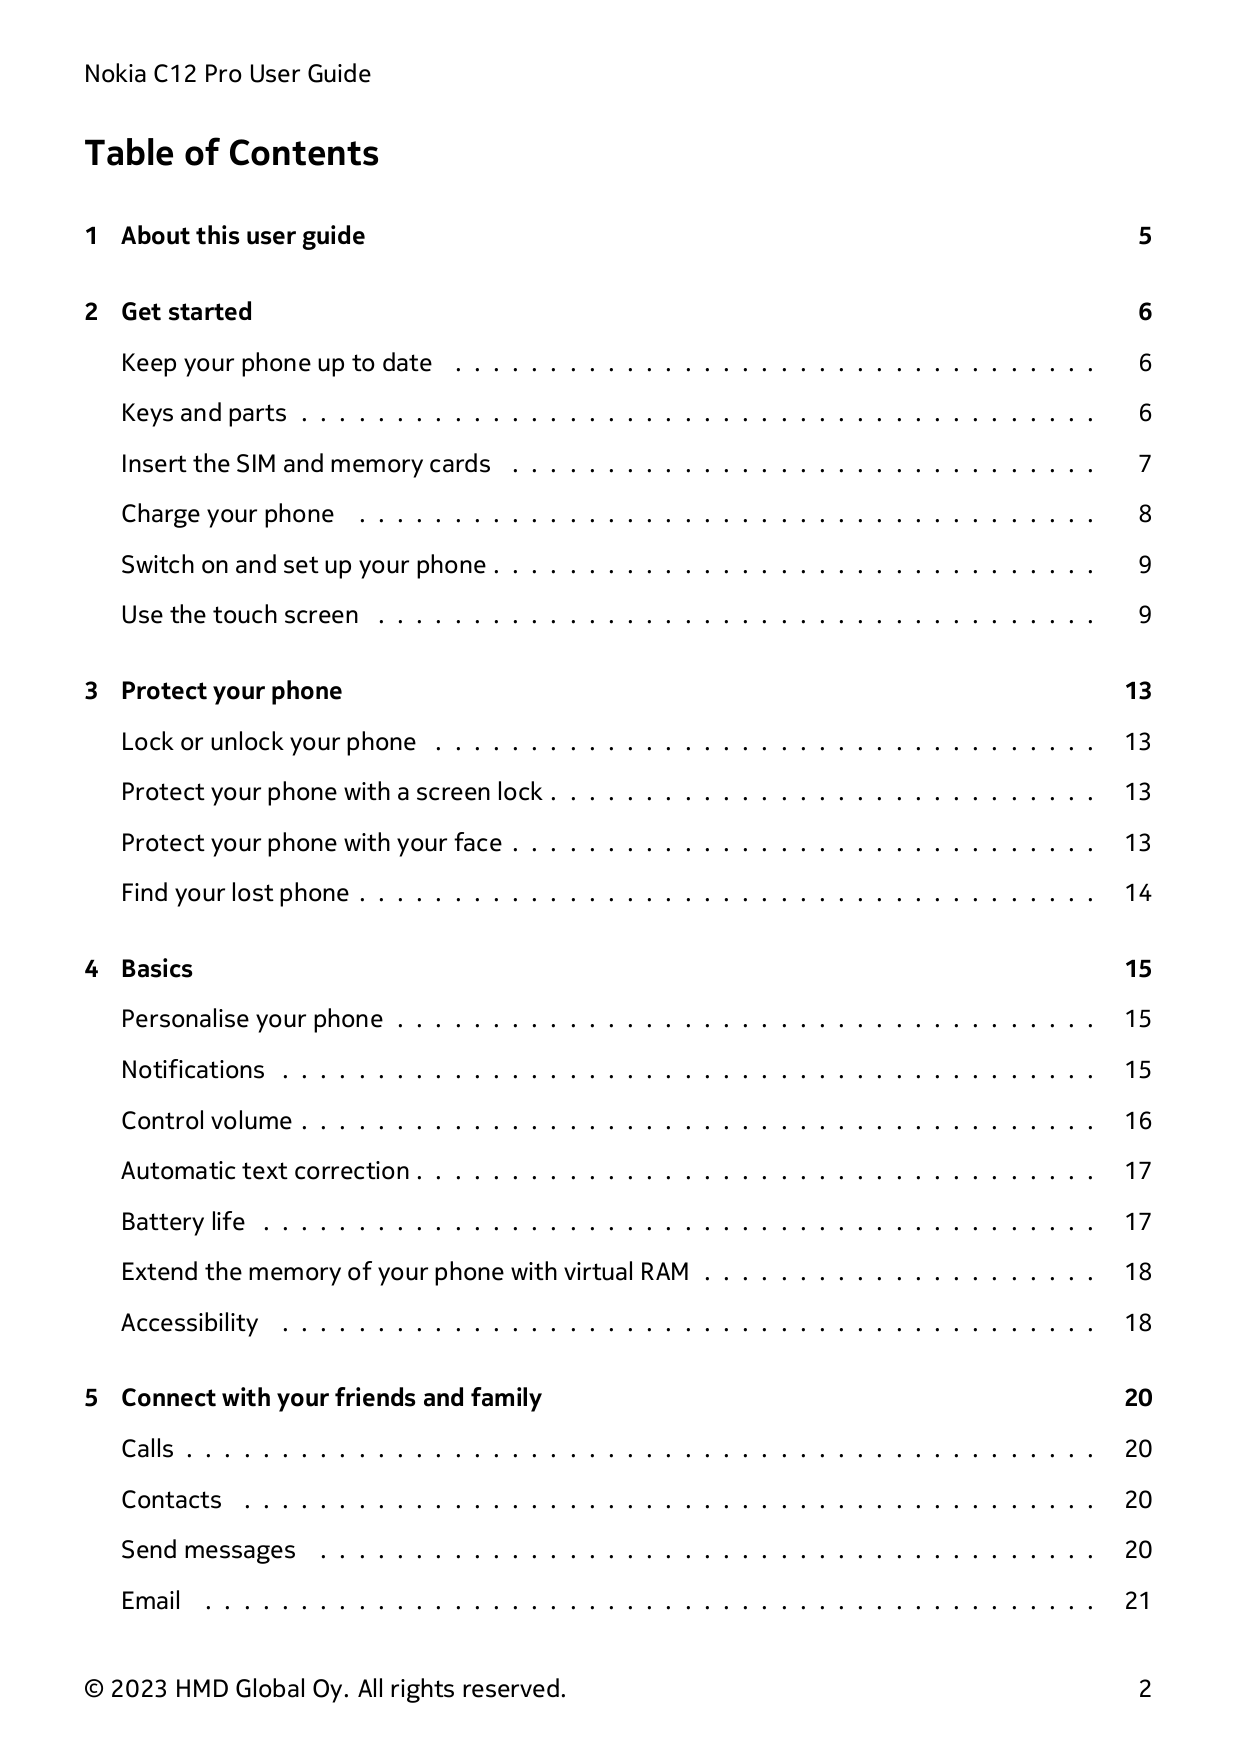 Nokia C12 Pro User GuideTable of Contents1 About this user guide52 Get started6Keep your phone up to date . . . . . . . . . . . 